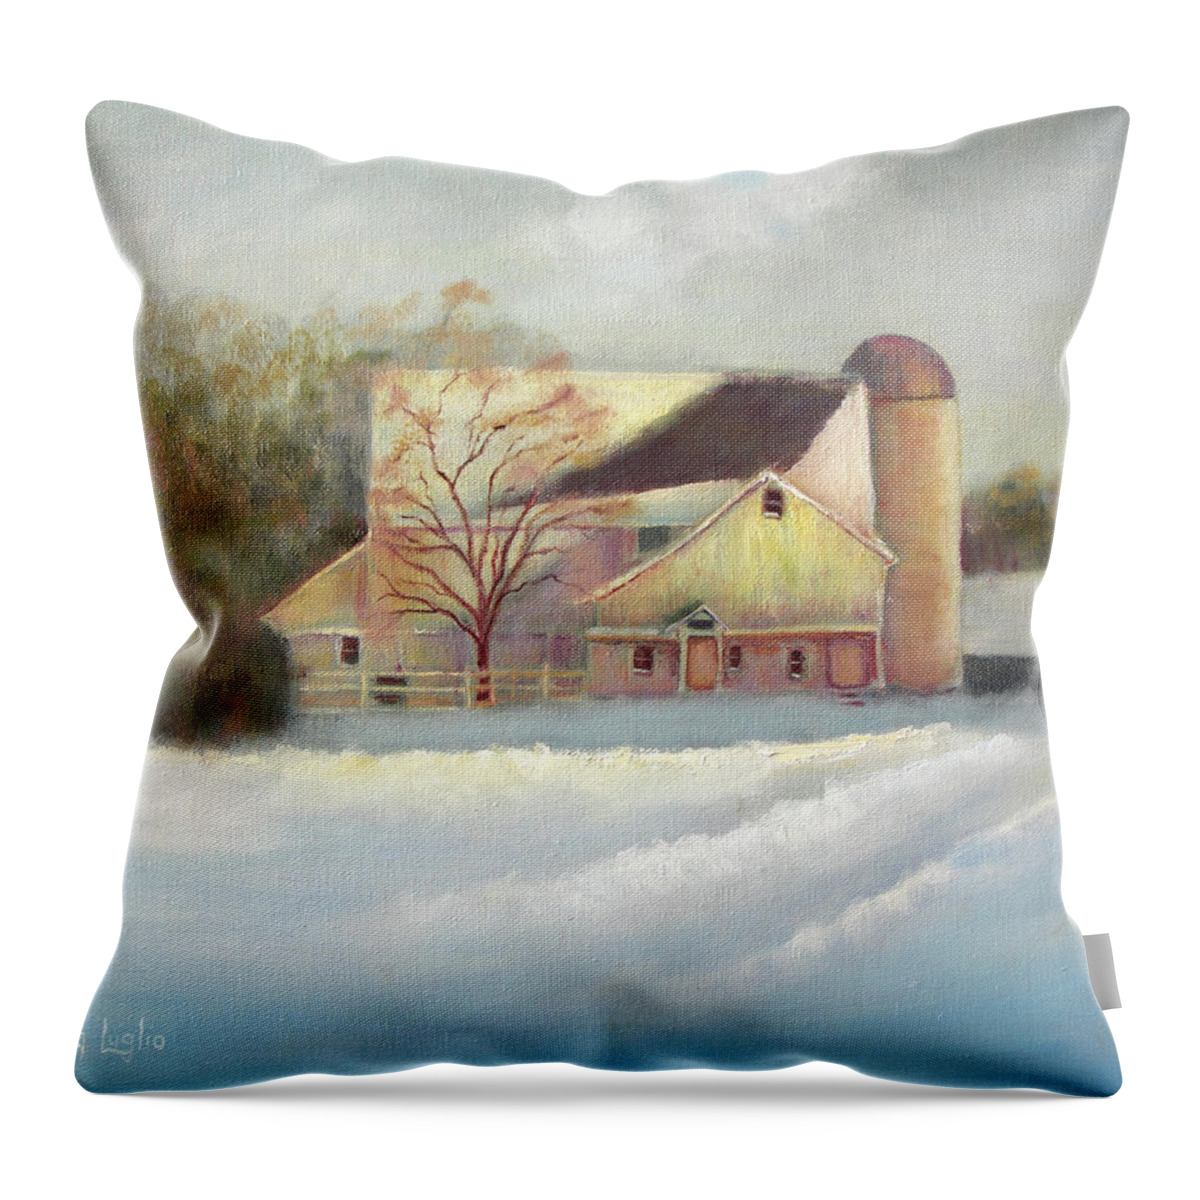 Winter Throw Pillow featuring the painting Winter Hush by Loretta Luglio